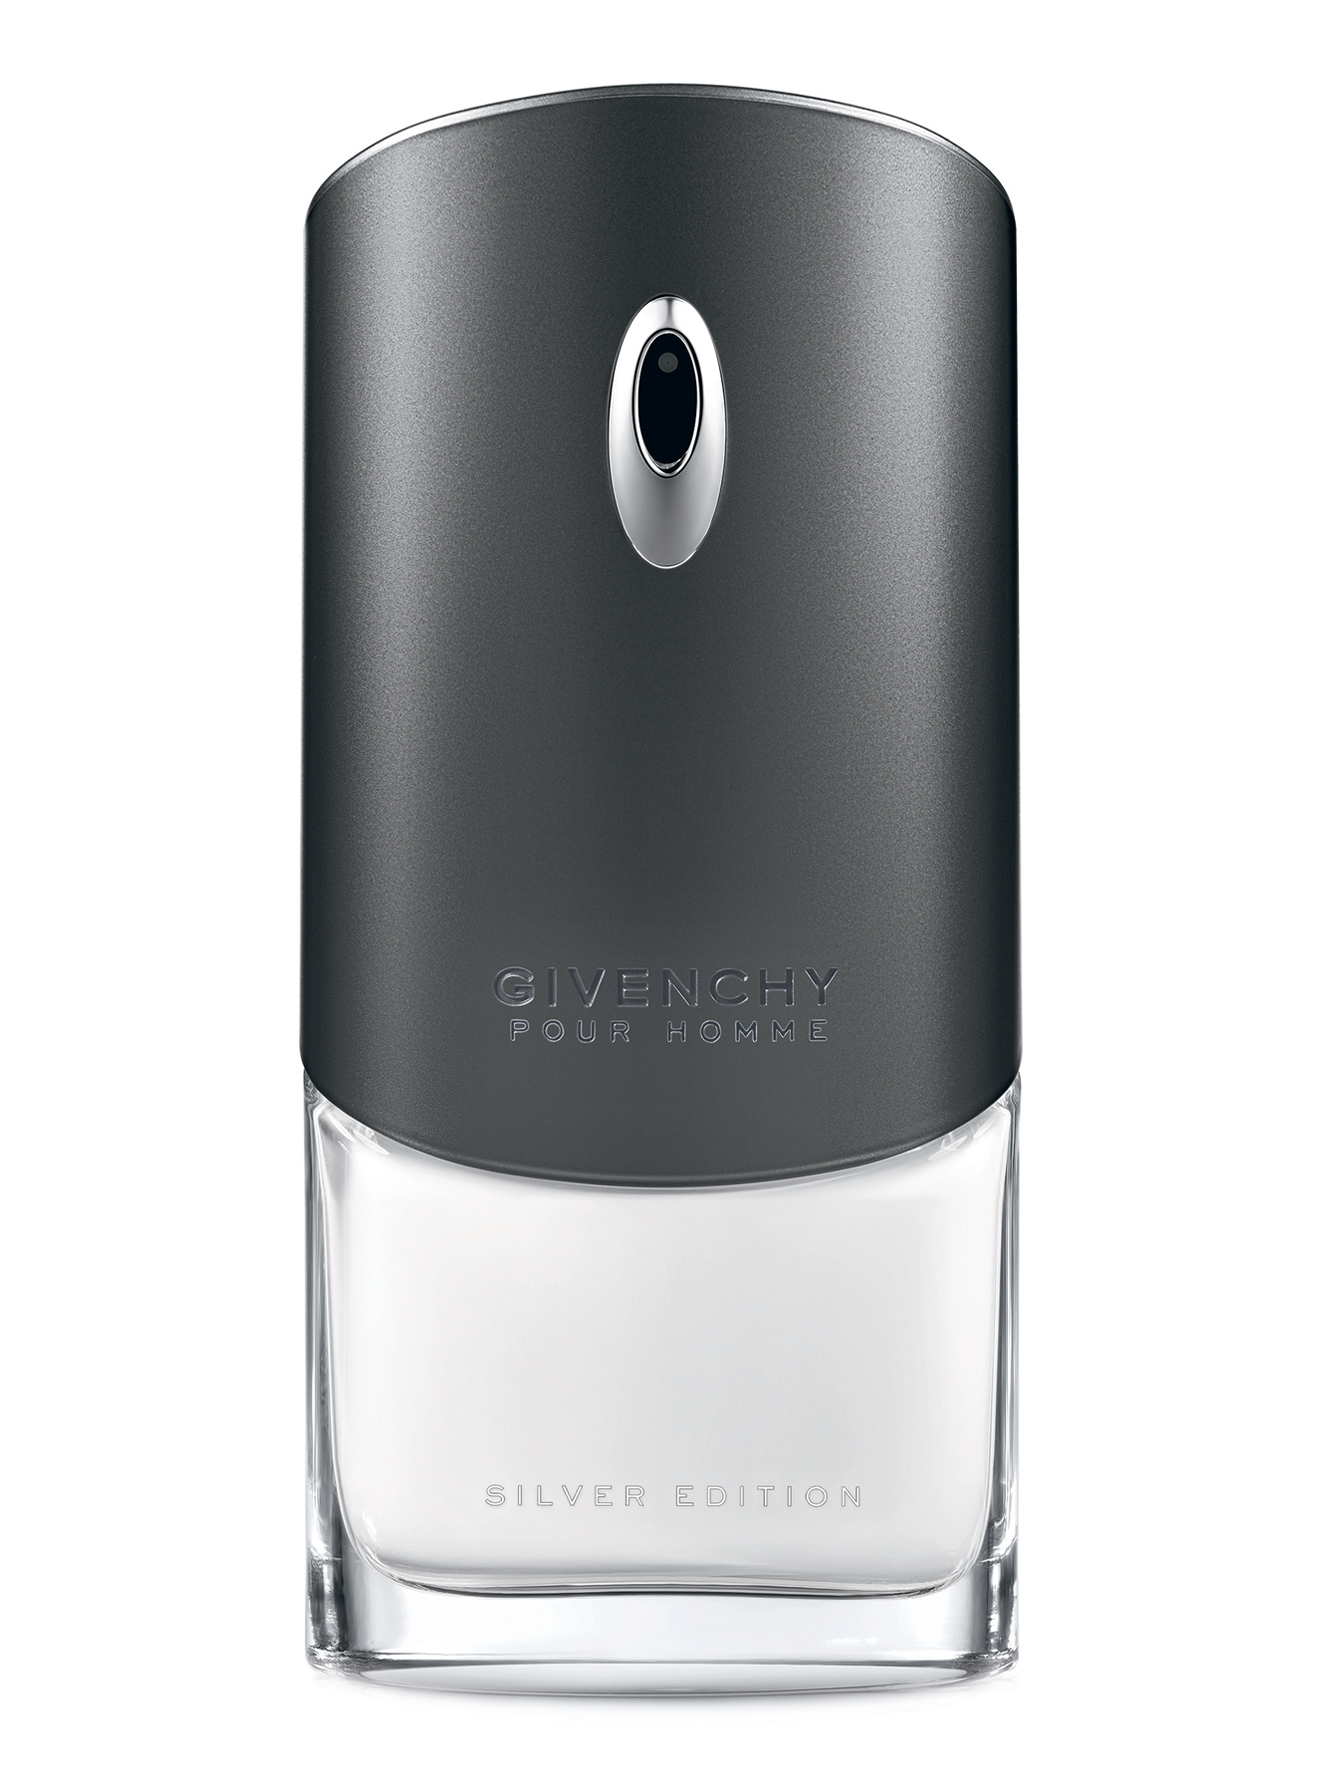 Givenchy pour homme 100. Givenchy pour homme Silver Edition. Givenchy pour homme Silver Edition, 100ml. Givenchy pour homme Silver. Туалетная вода Givenchy pour homme Silver Edition, 50мл.